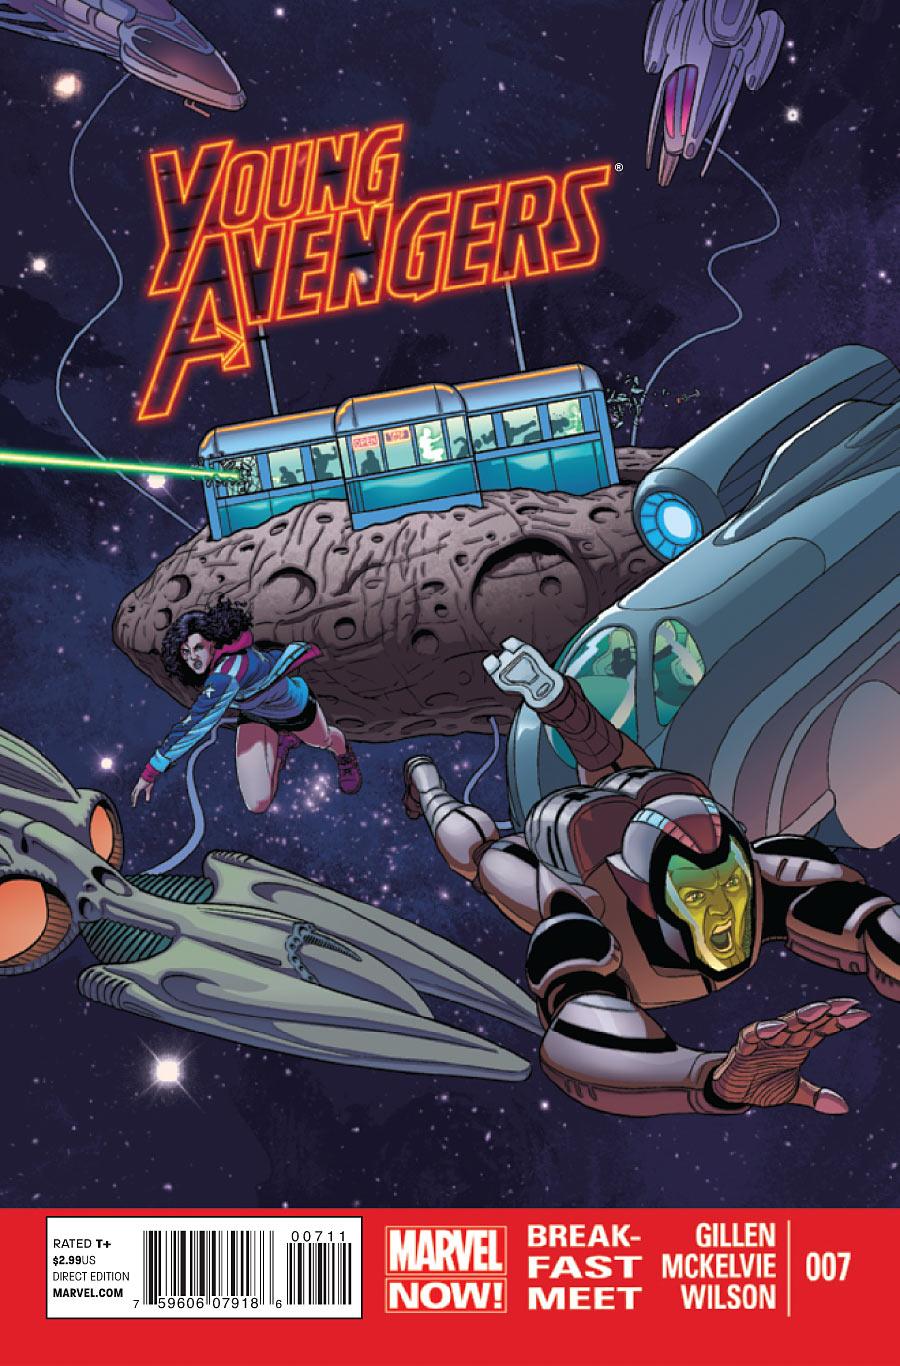 Young Avengers Vol. 2 #7